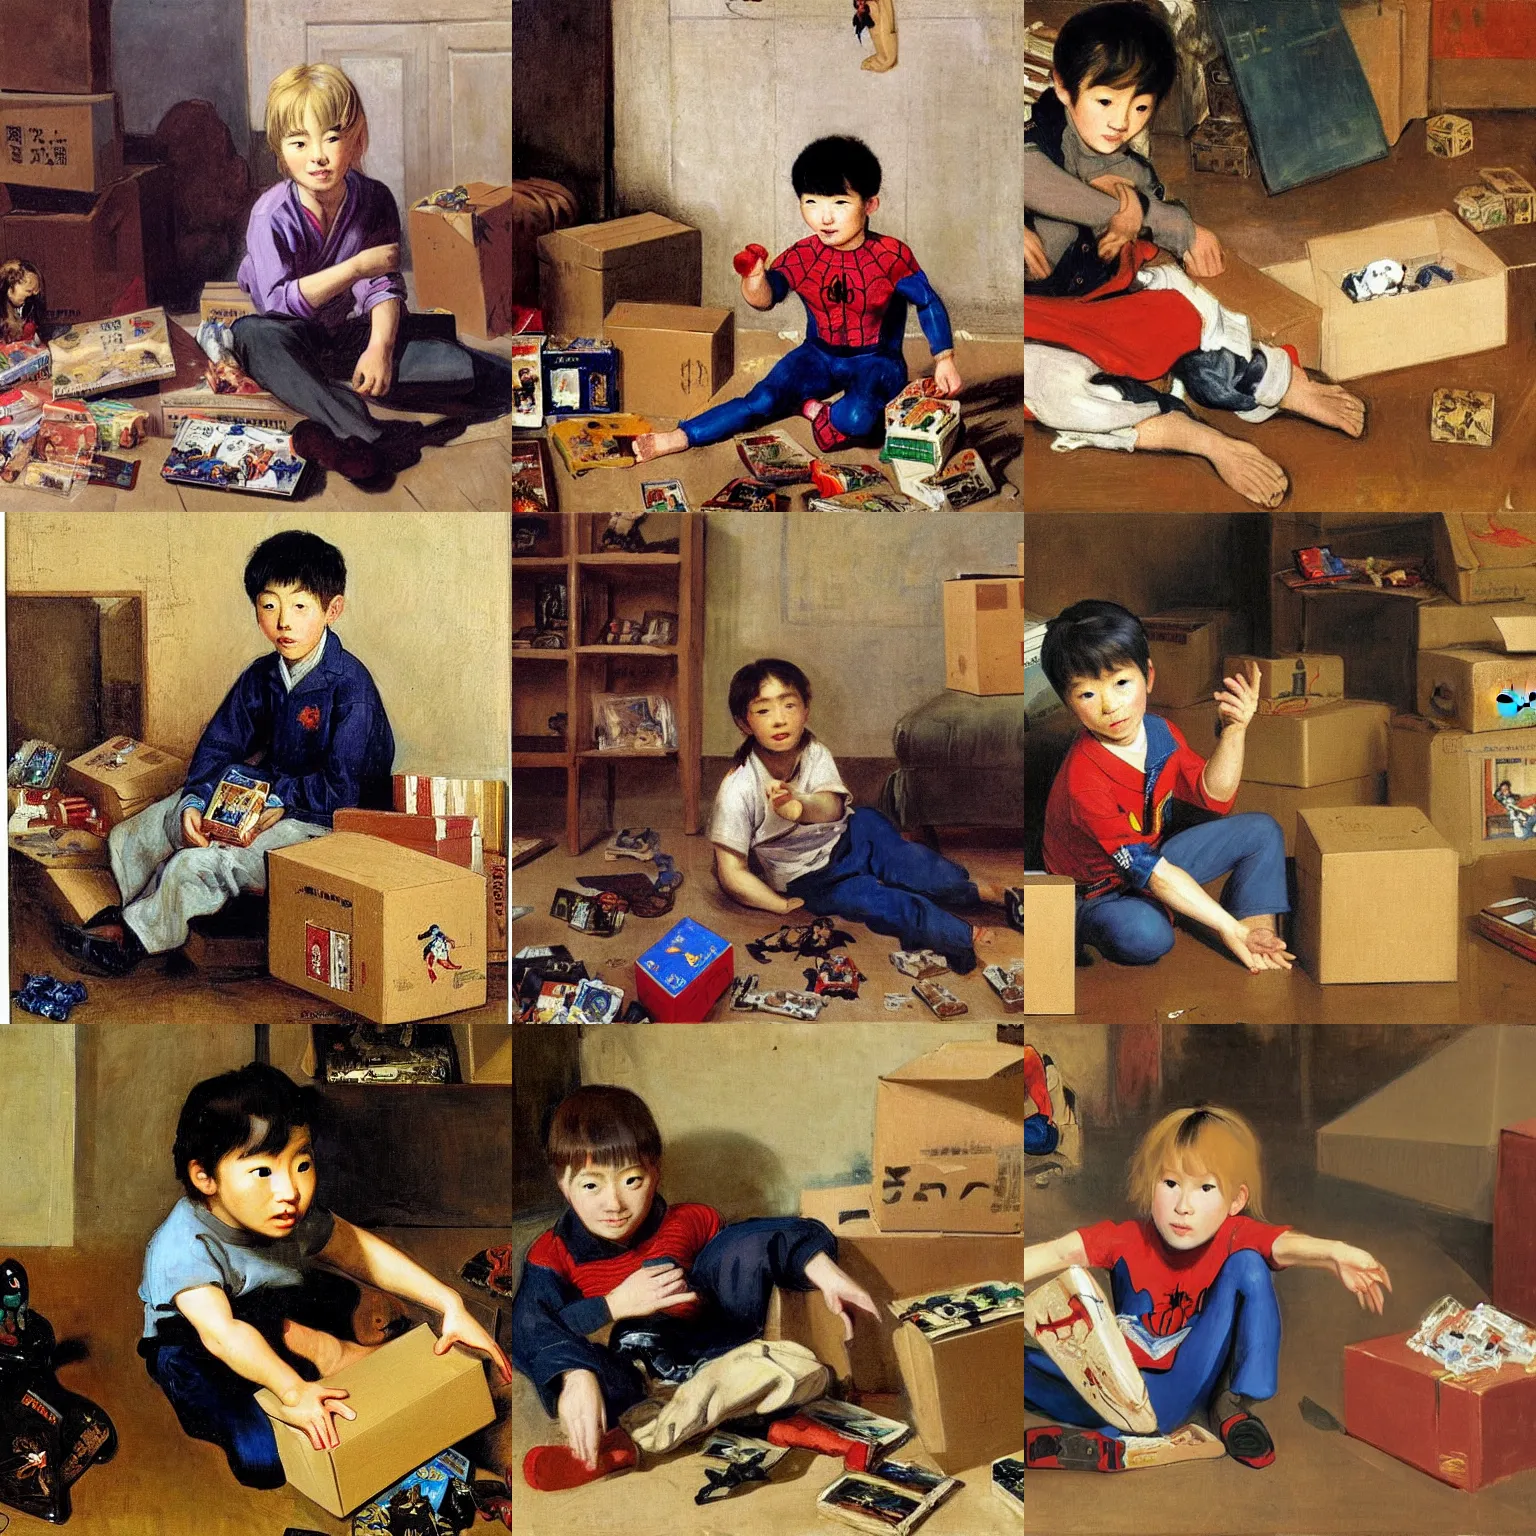 Prompt: A young Korean boy with long blond hair sitting on the floor, surrounded by open boxes from Amazon , and playing with a Spiderman action figure, oil painting by Eugène Delacroix